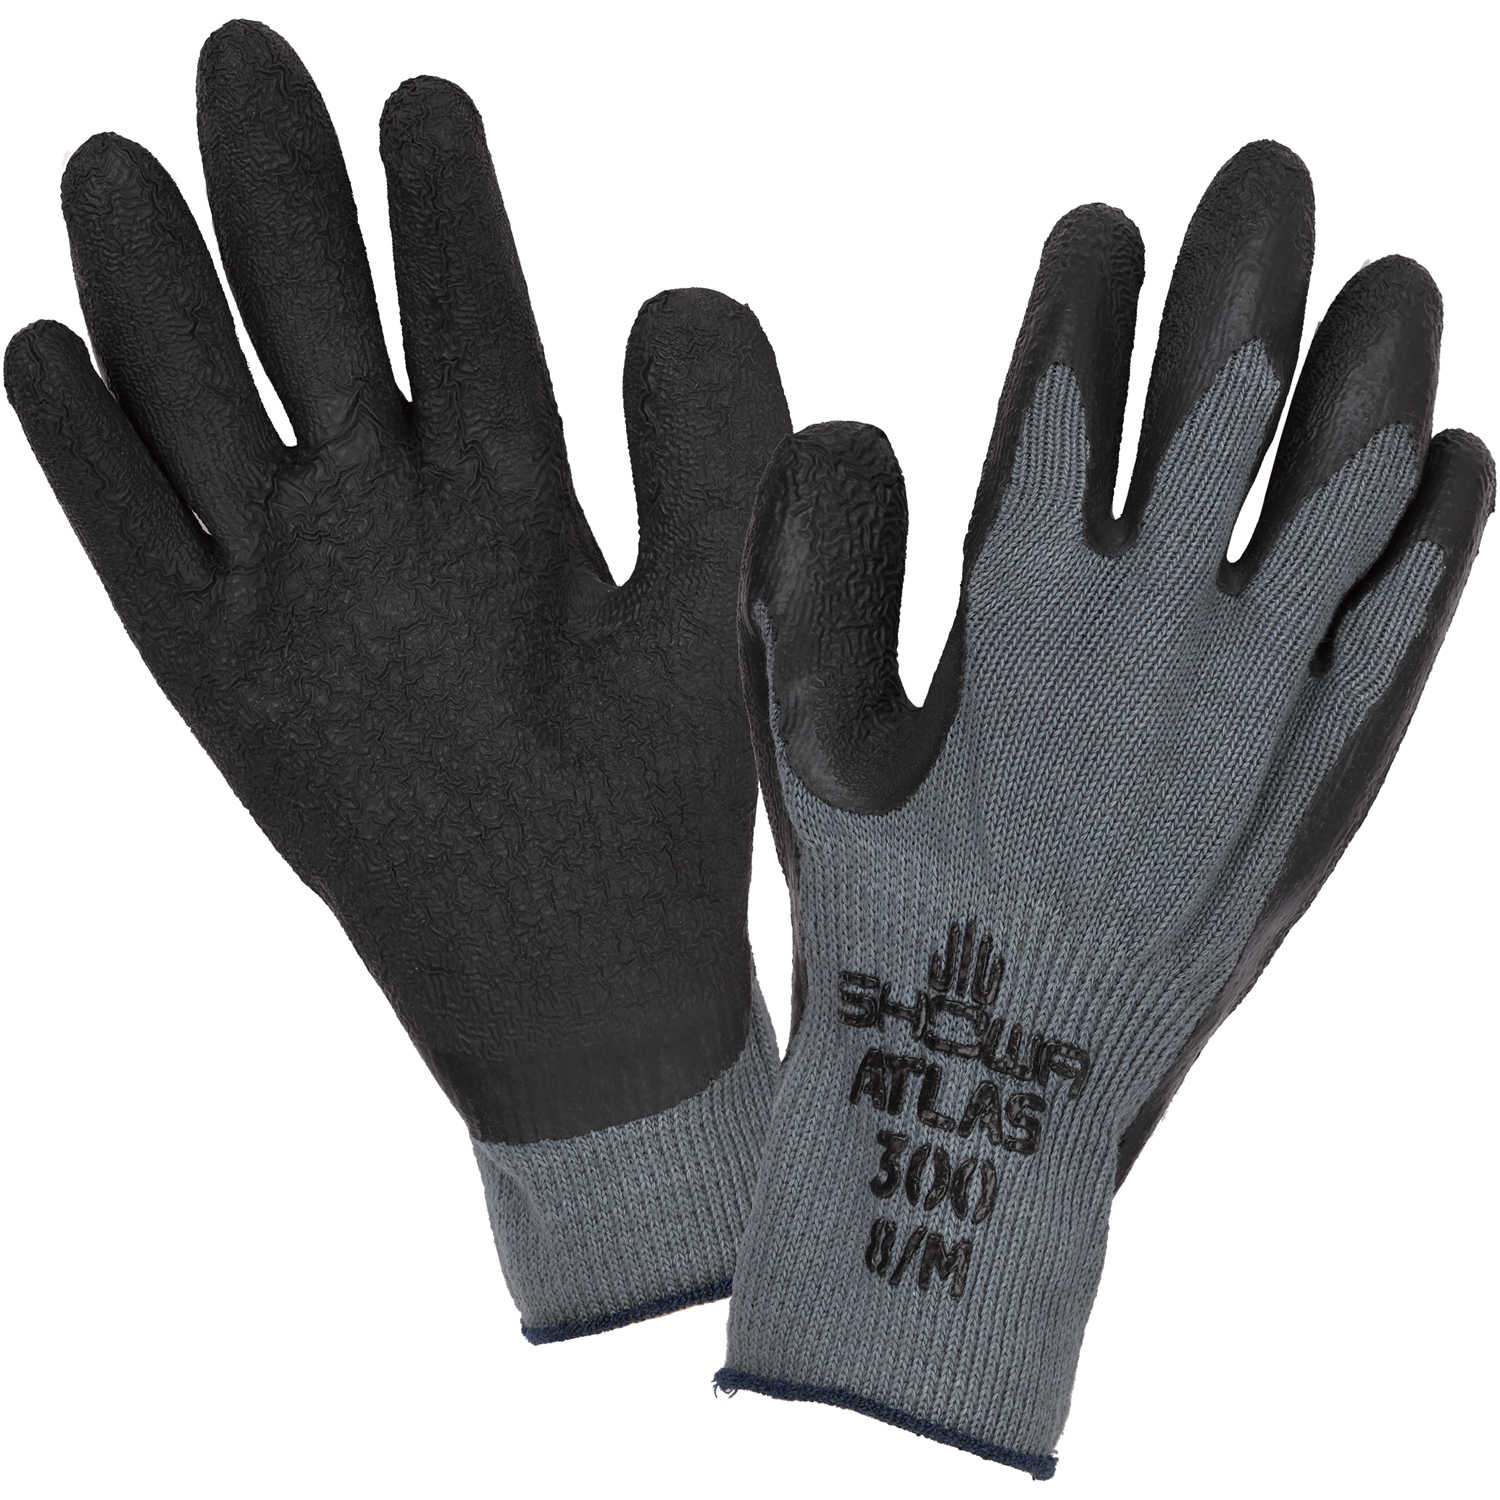 One pair of Atlas Fit 300 Showa 8/M Gloves Rubber Coated 